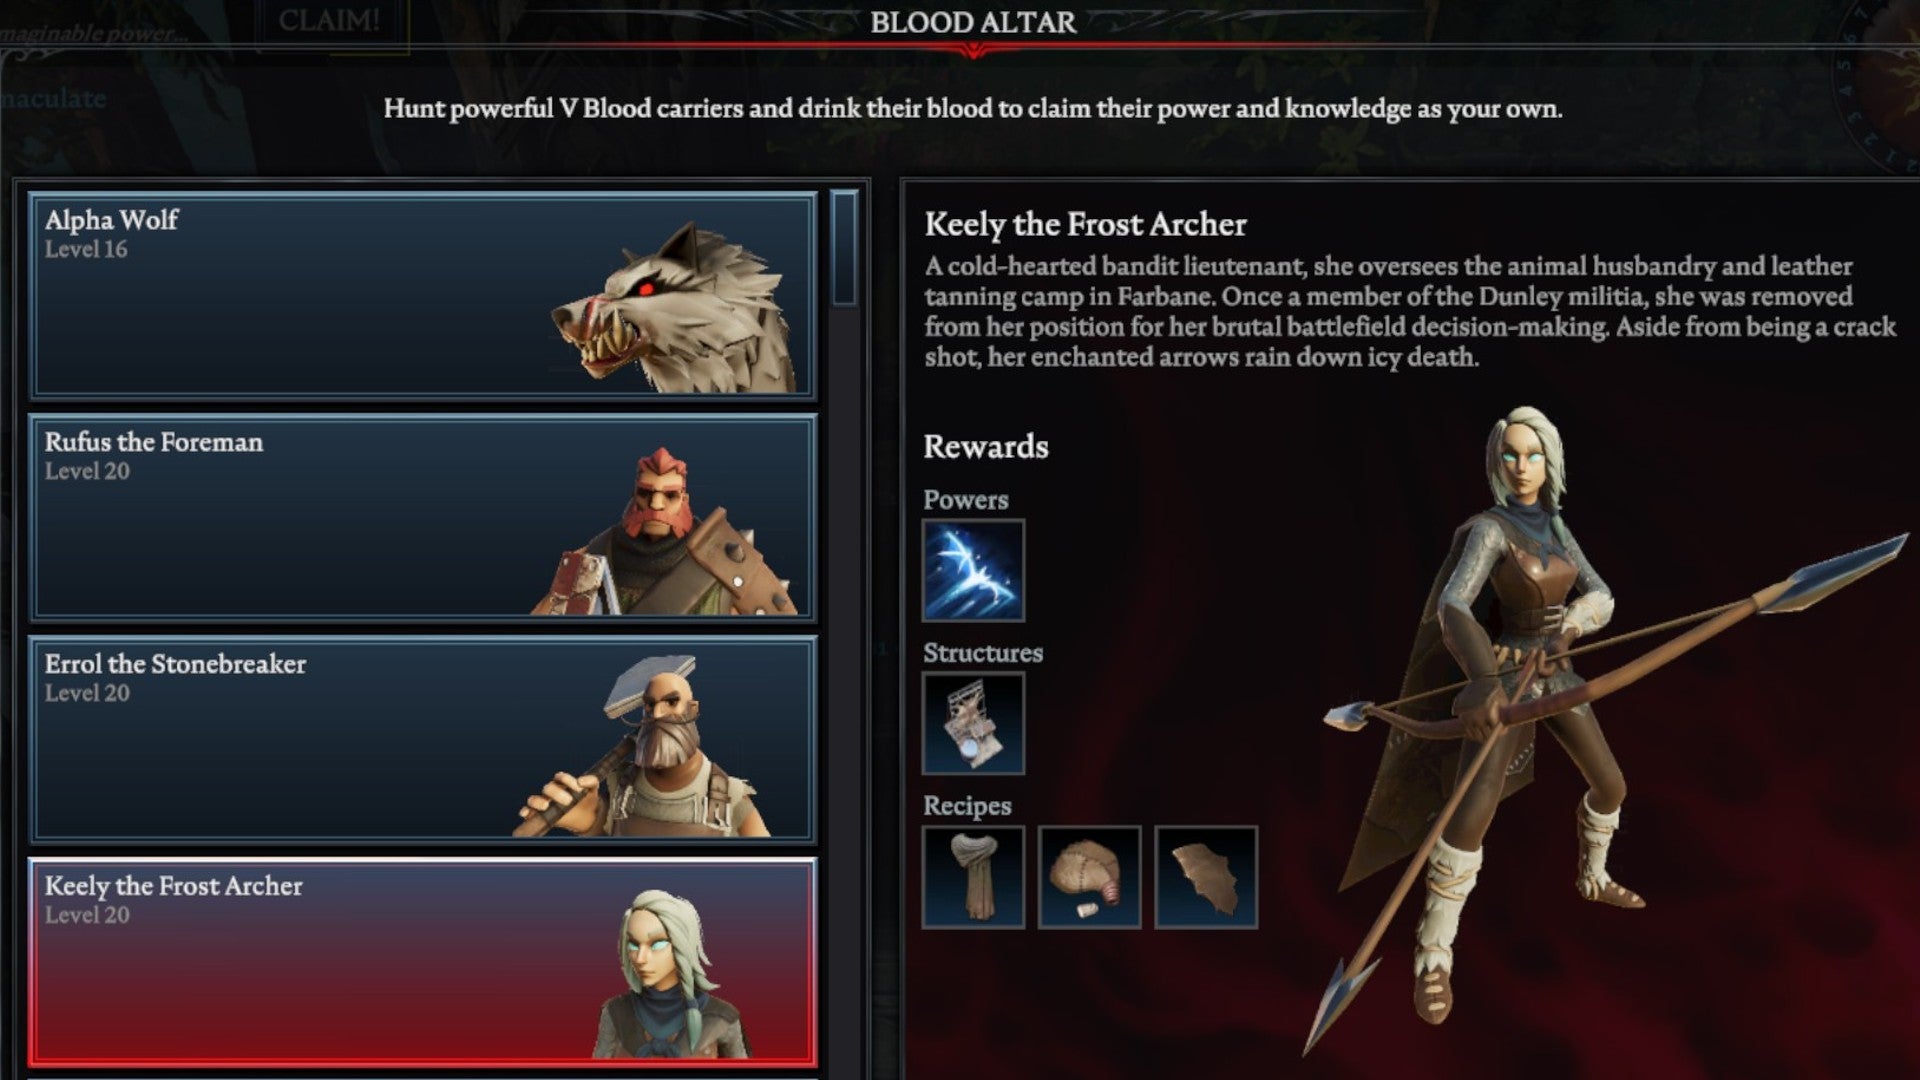 V Rising Keely the Frost Archer Blood Altar tracking page, showing an image of the frost archer on the right and a list of bosses on the left